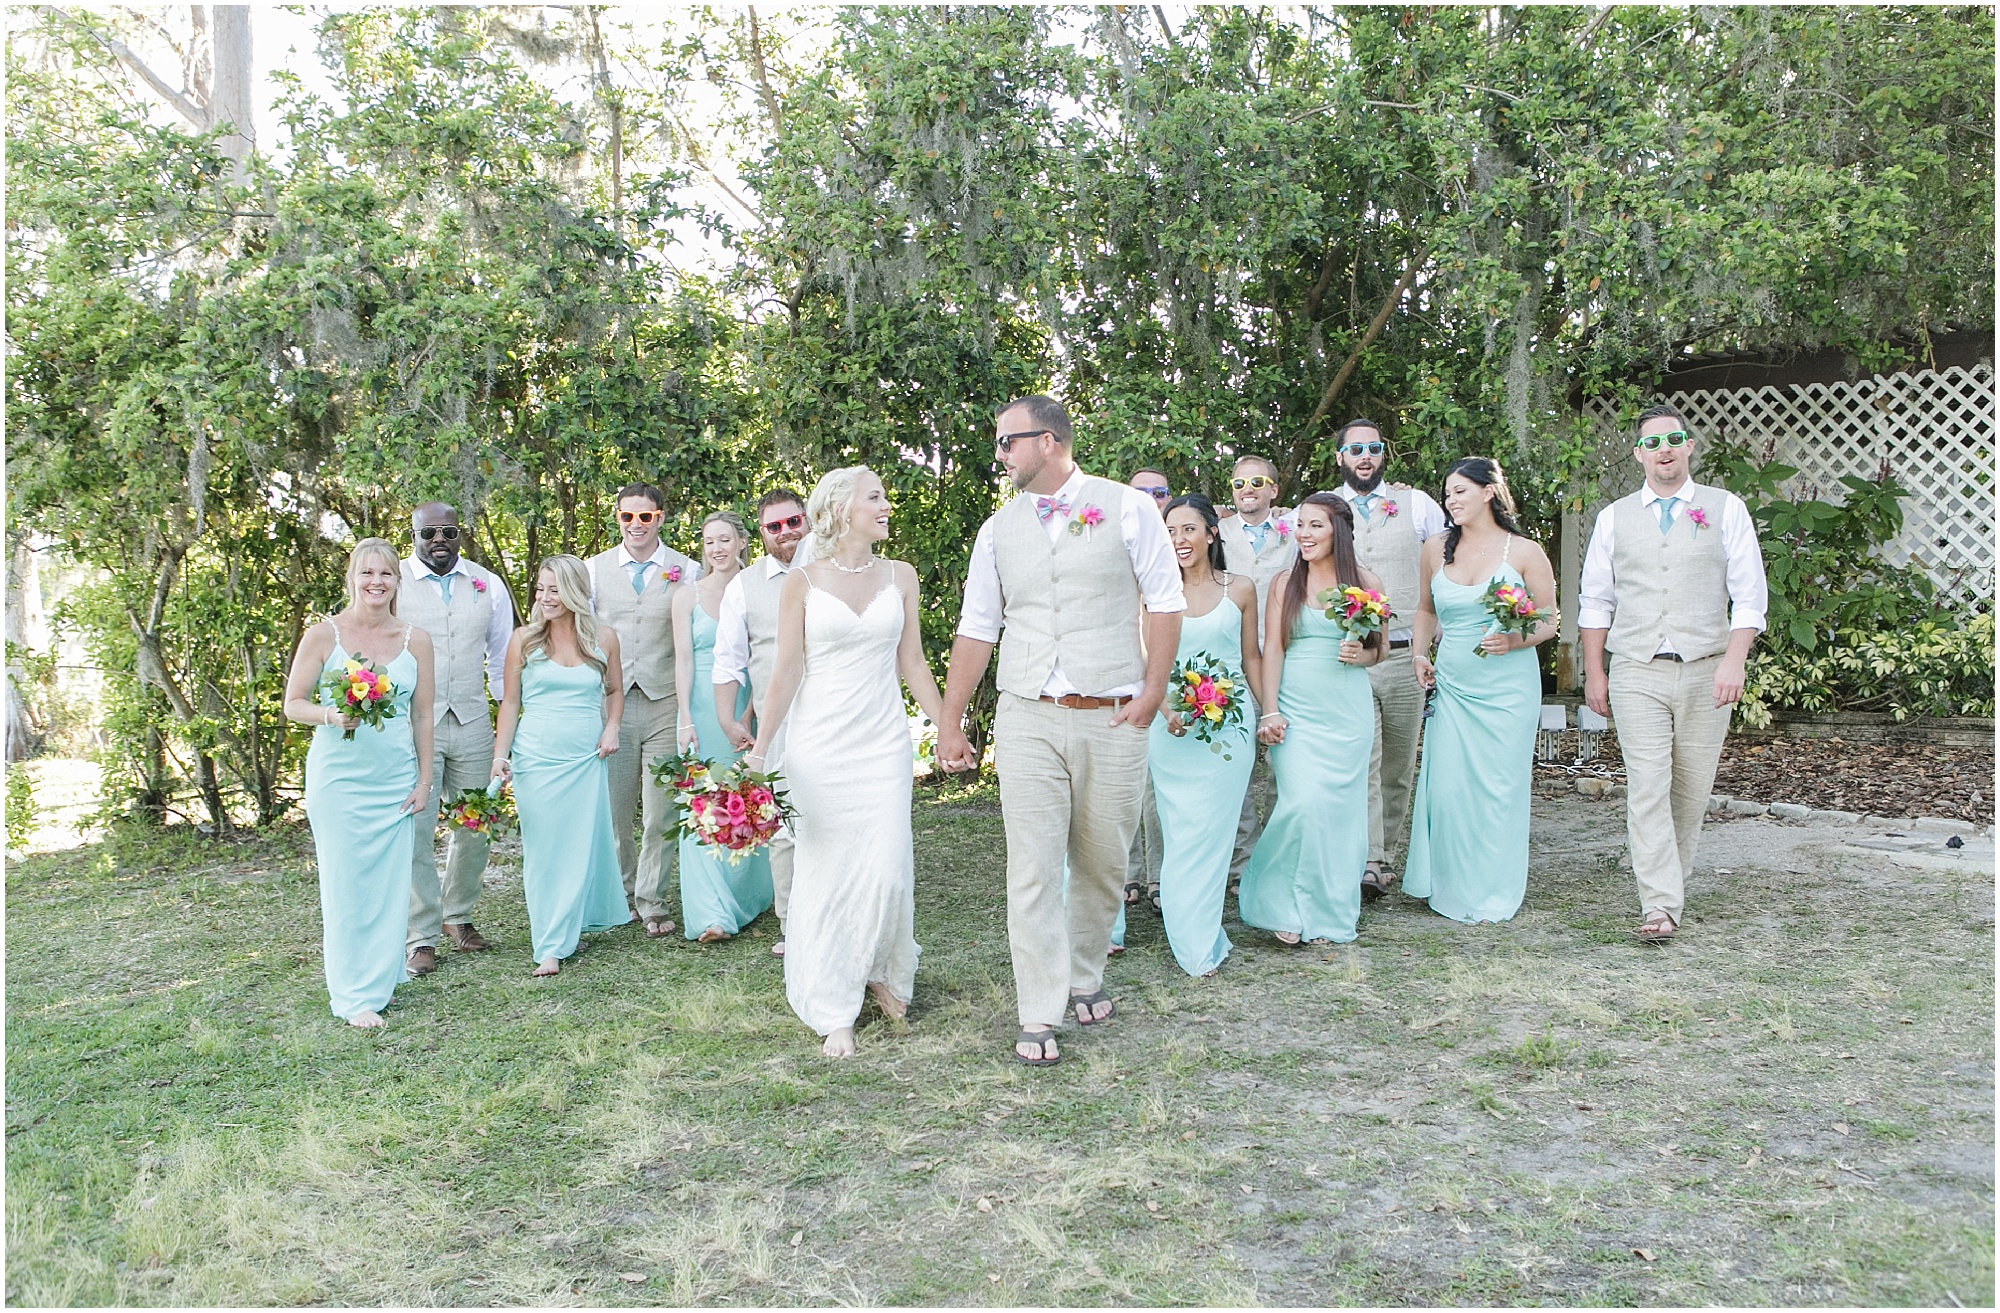 Bride and groom walking their wedding party. 